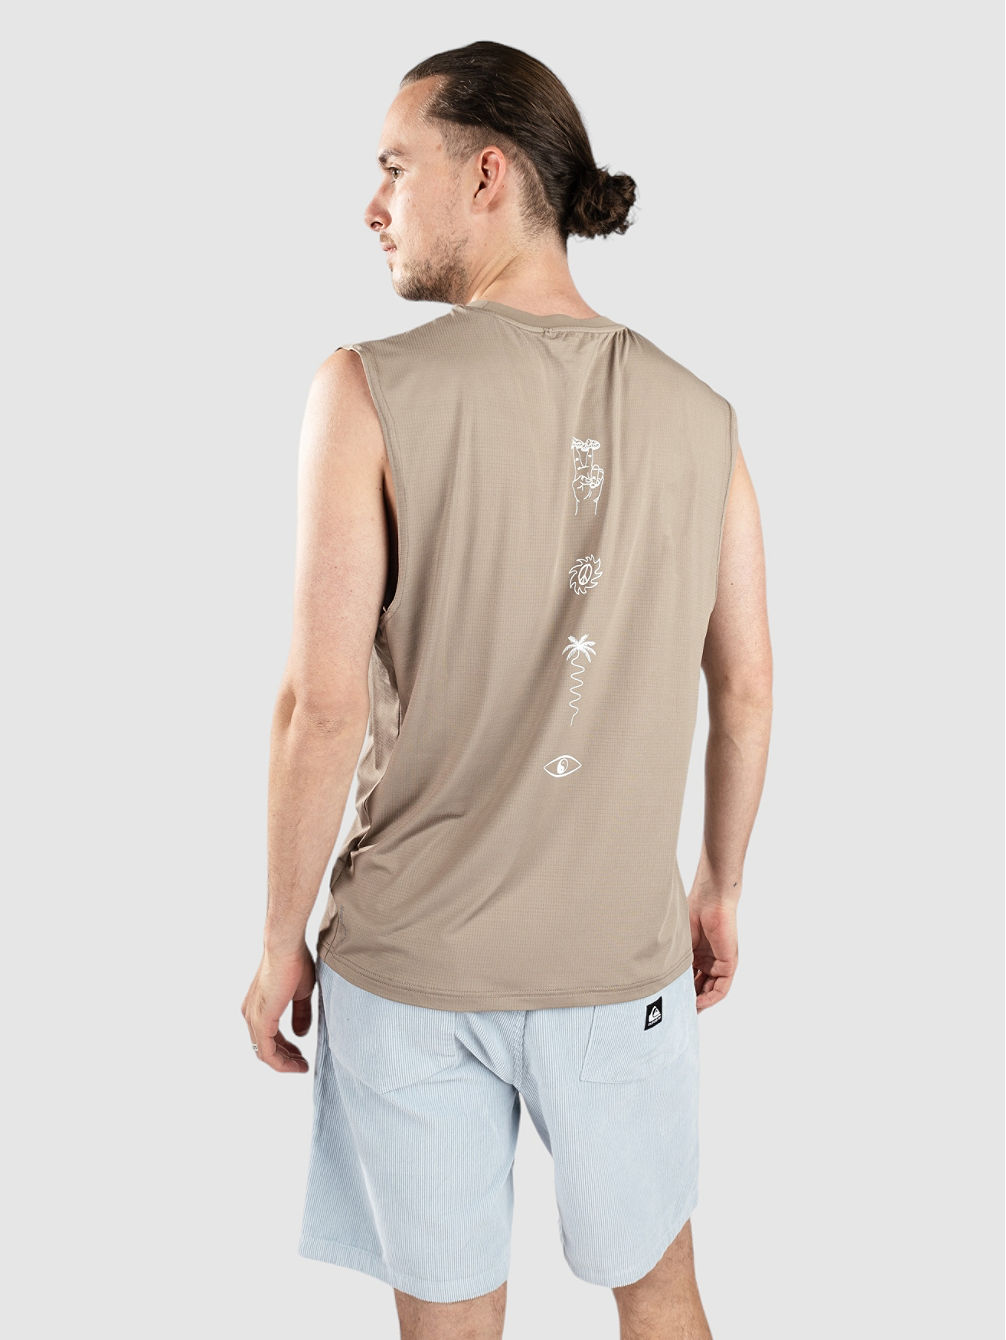 Lap Time Muscle Tank Top